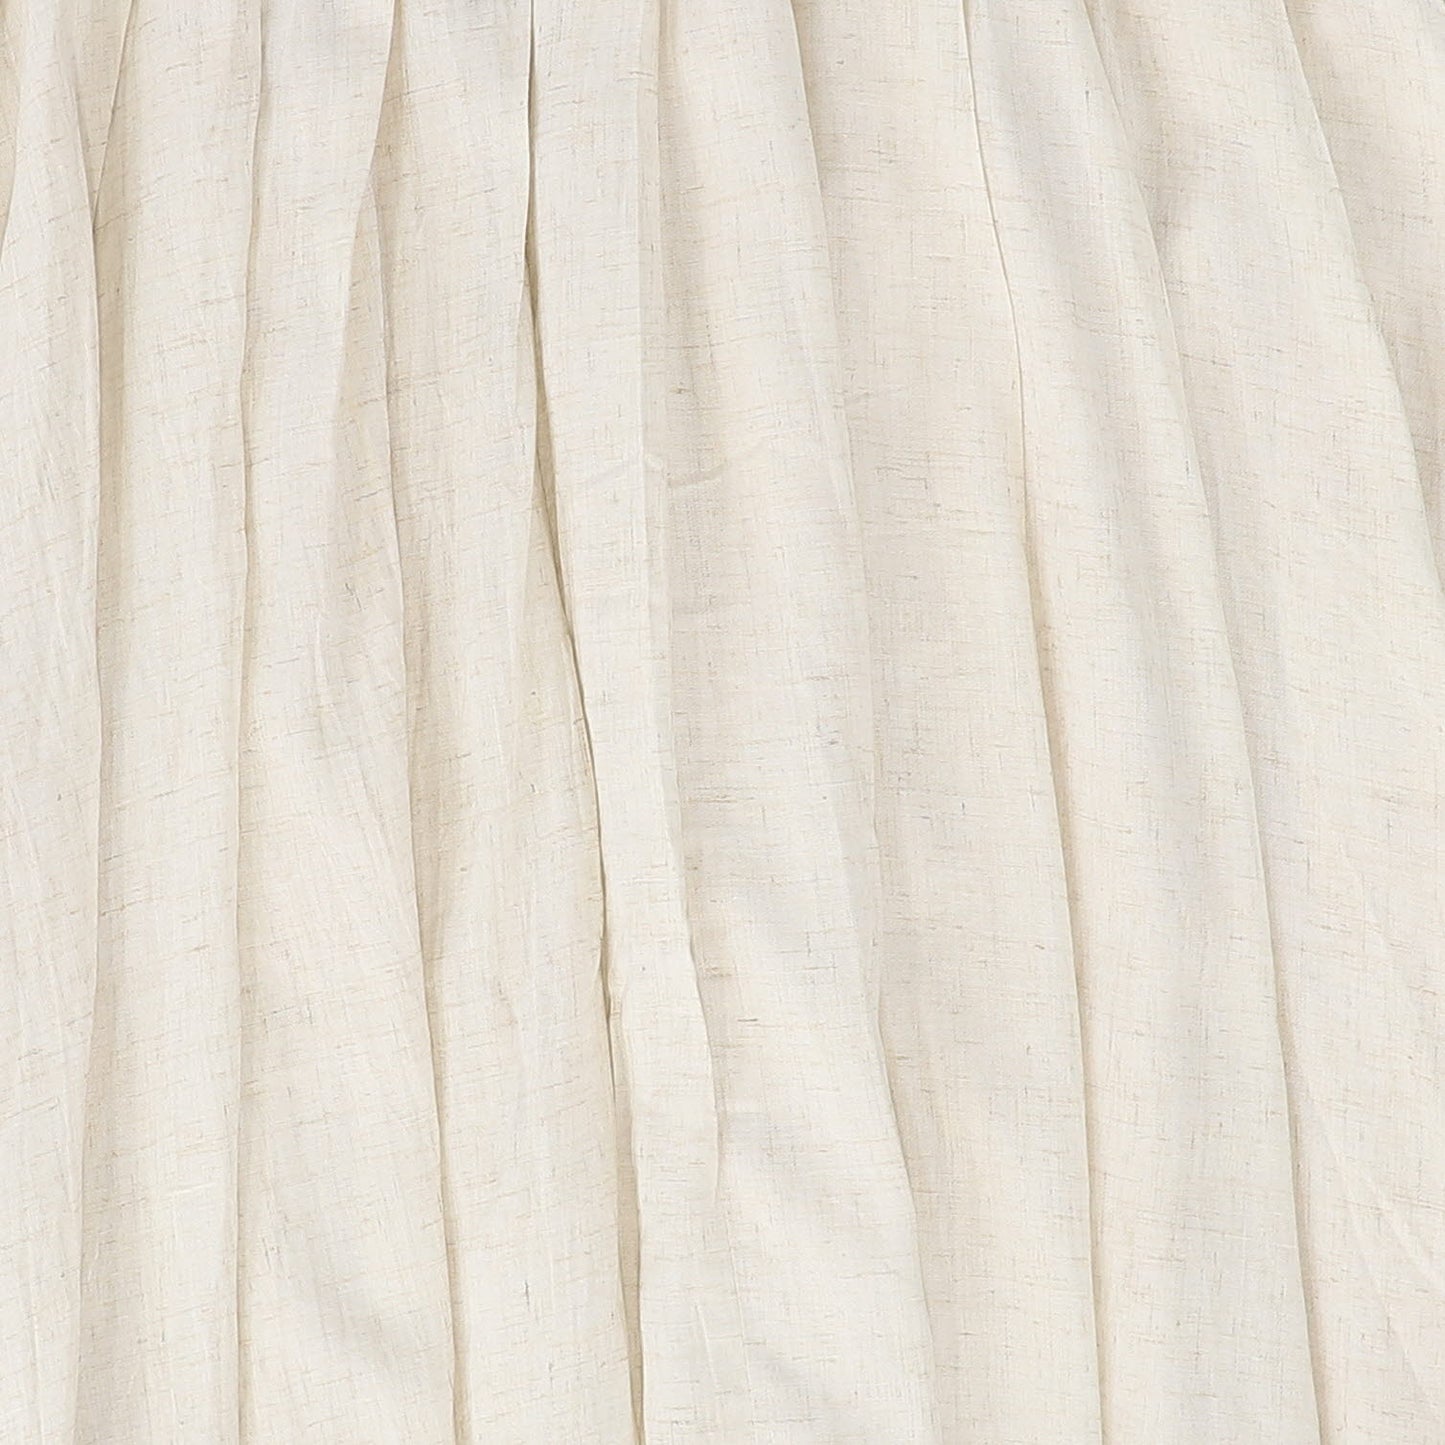 BACE COLLECTION OATMEAL PLEATED FLARE SKIRT